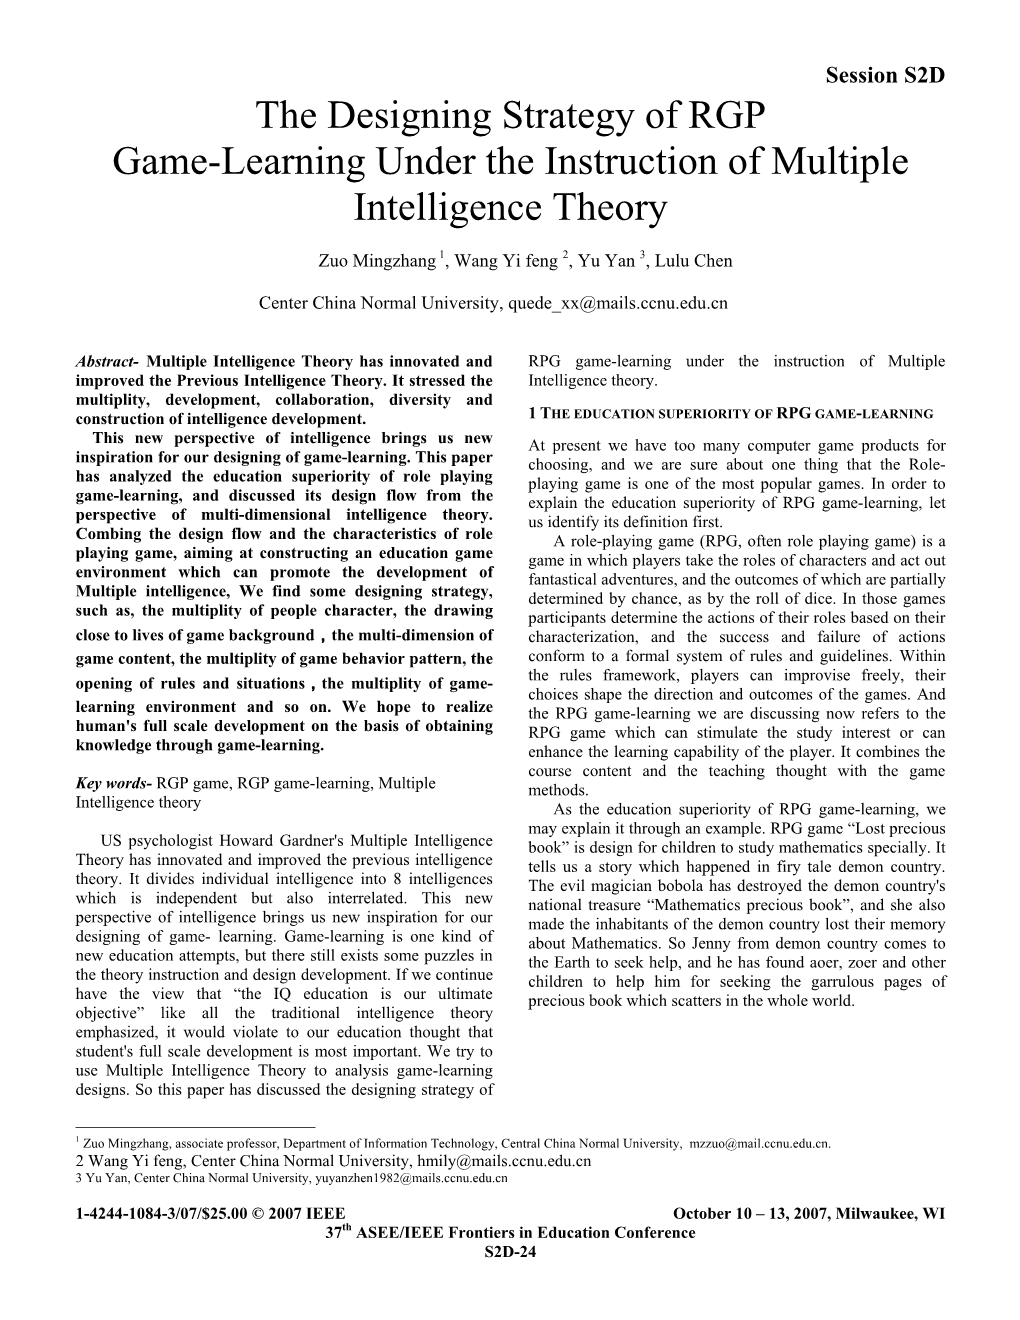 The Designing Strategy of RGP Game-Learning Under the Instruction of Multiple Intelligence Theory